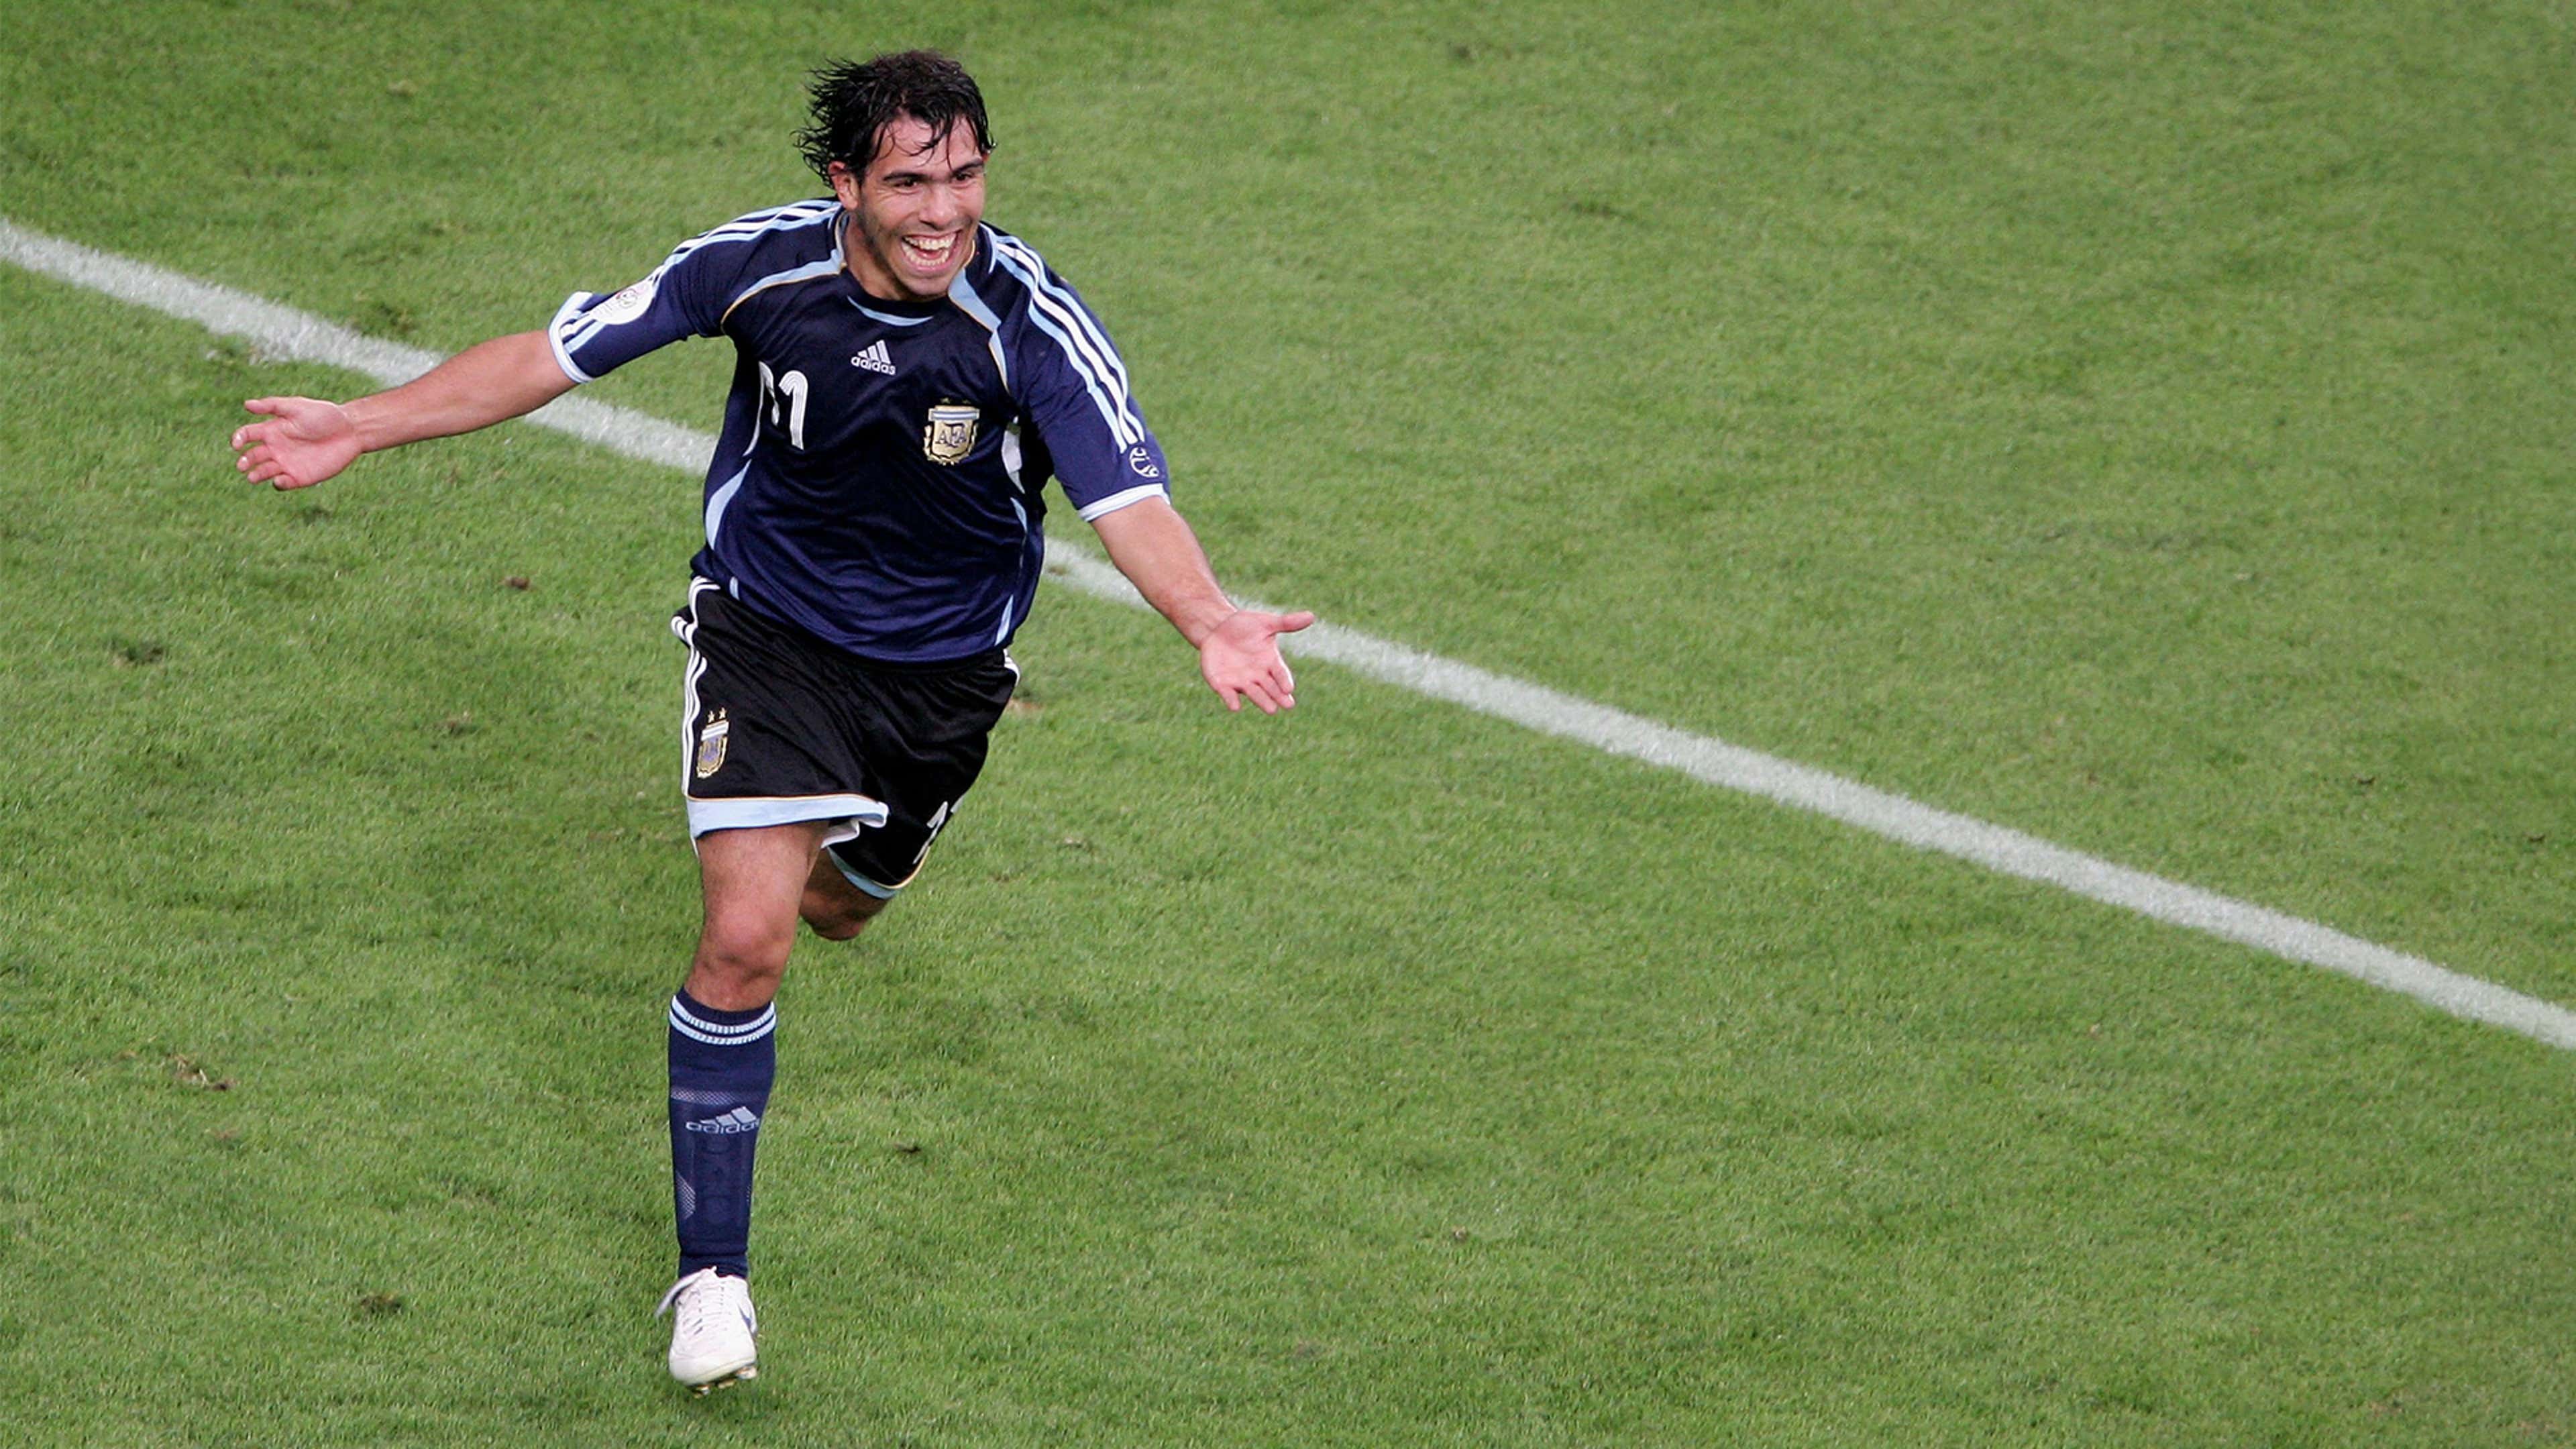 The 10 best Argentina World Cup kits of all time